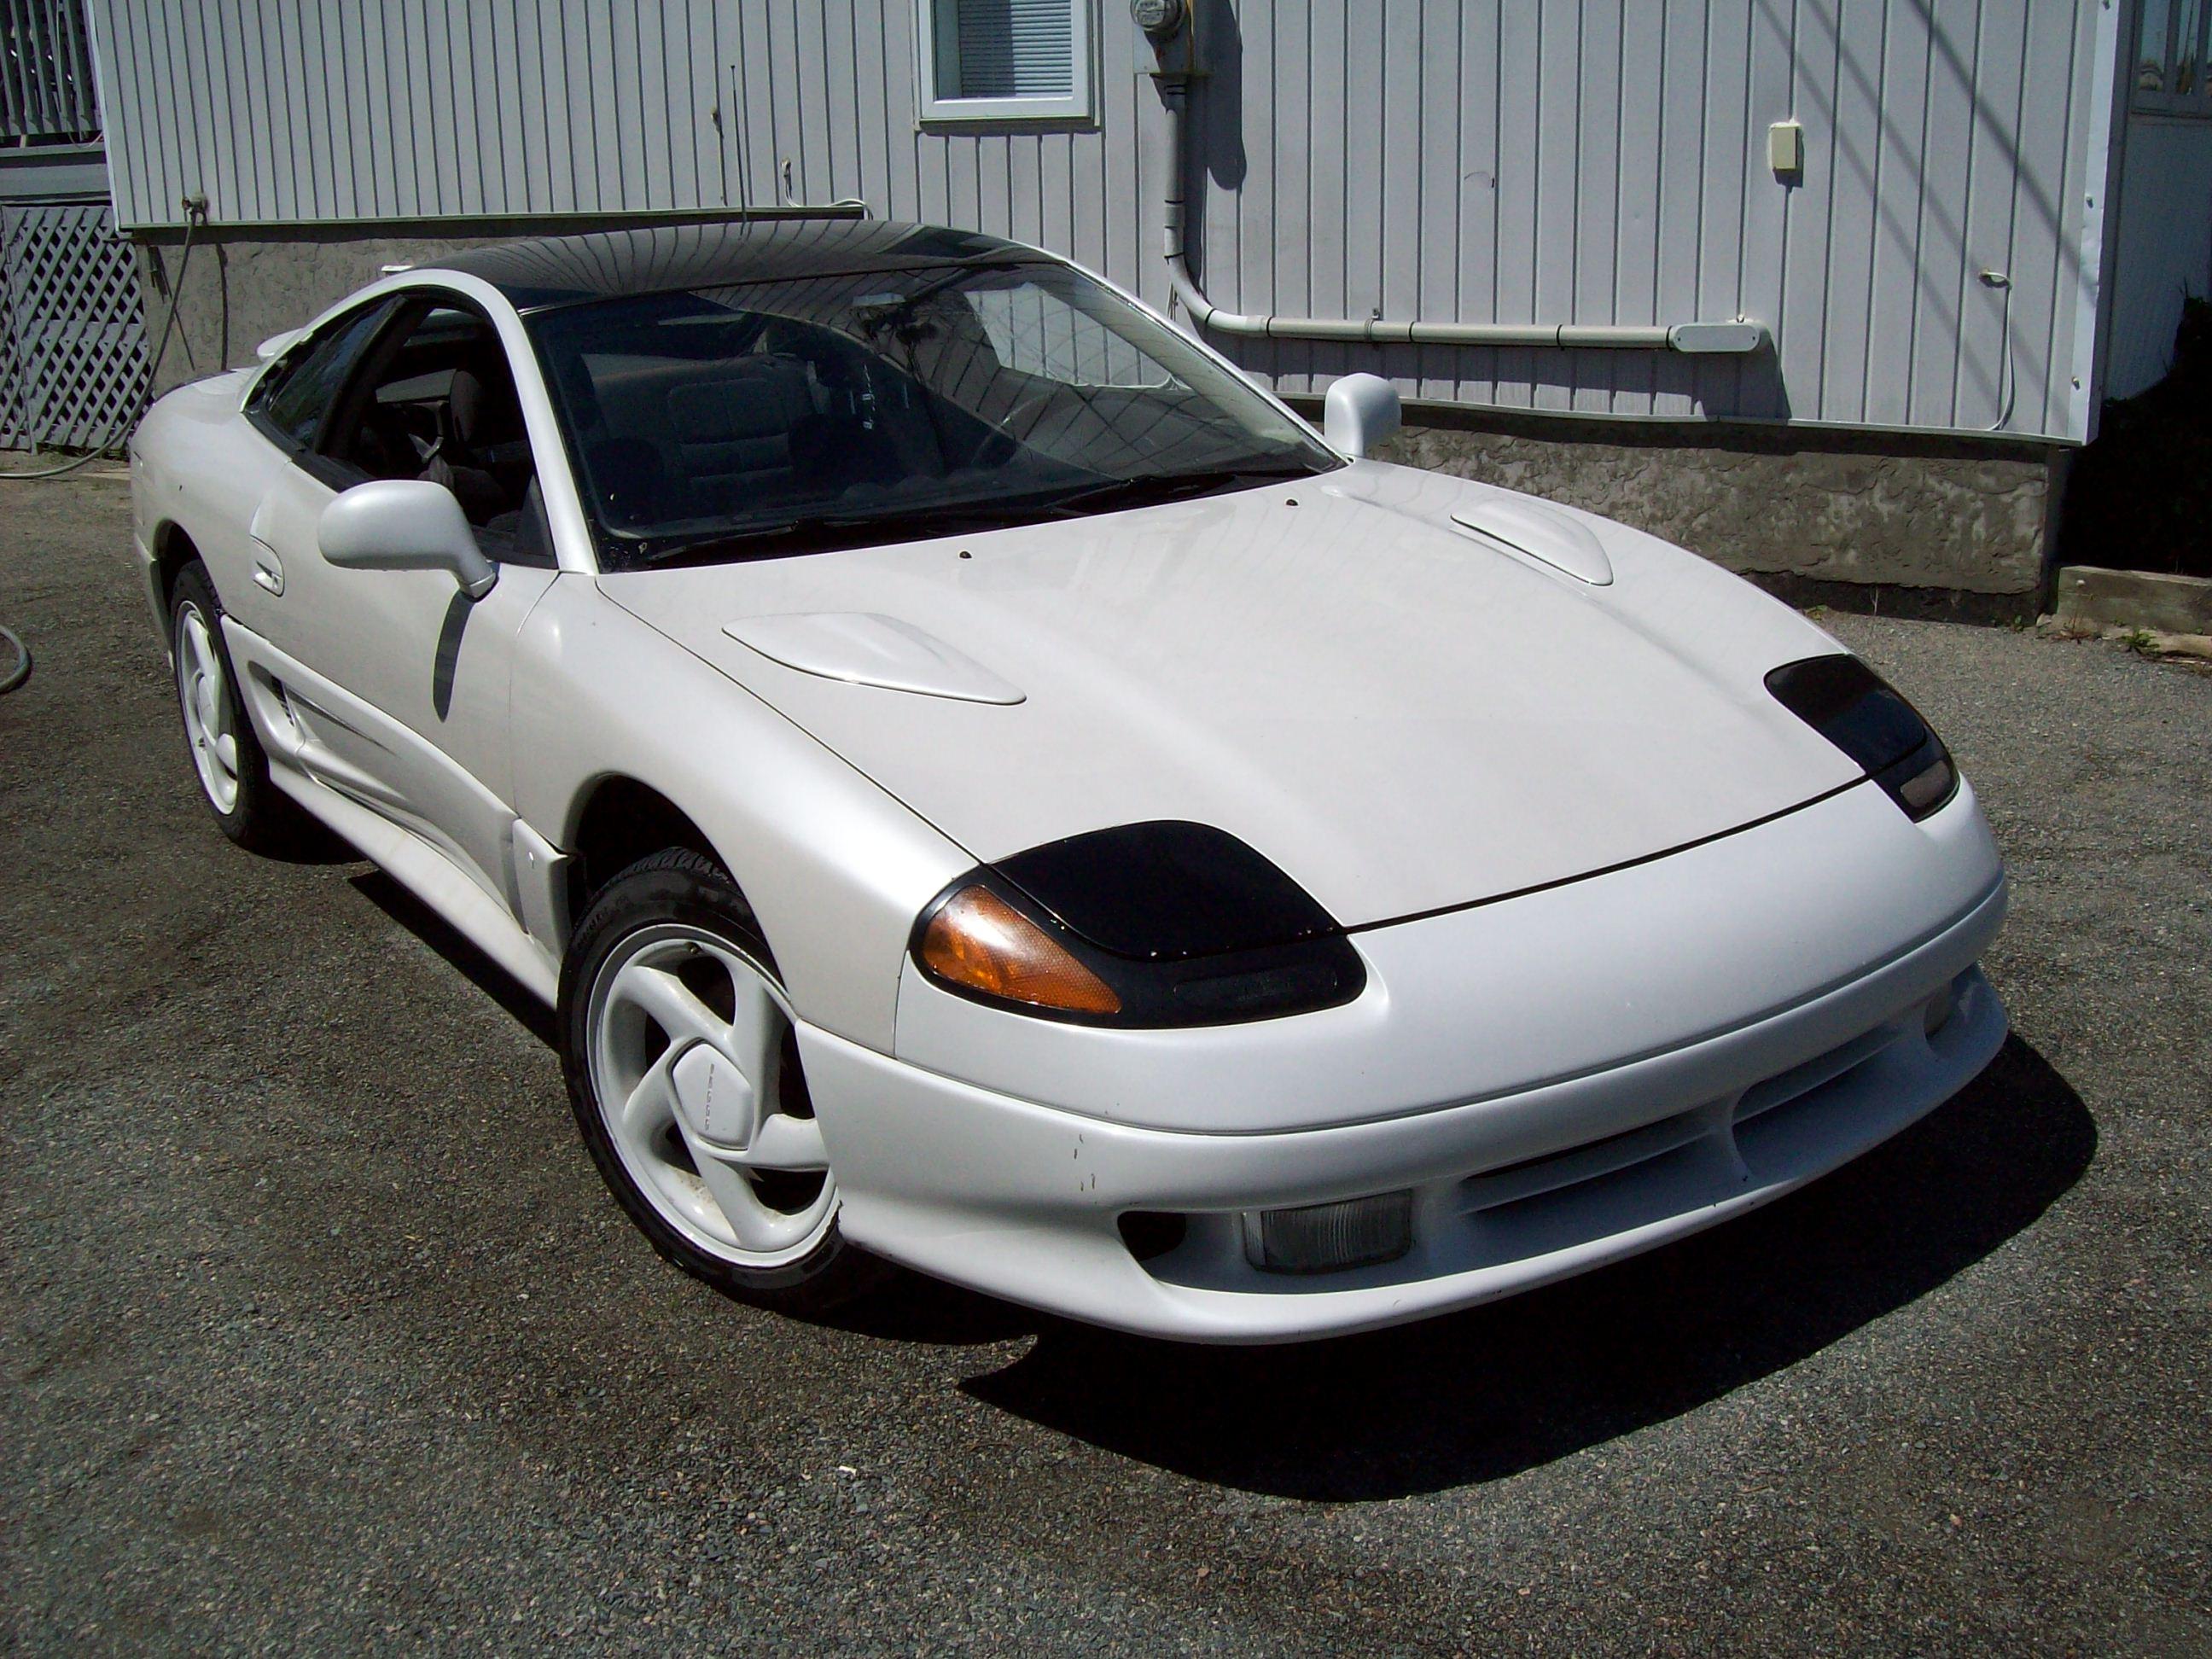 Do you remember when the dodge stealth was released? 